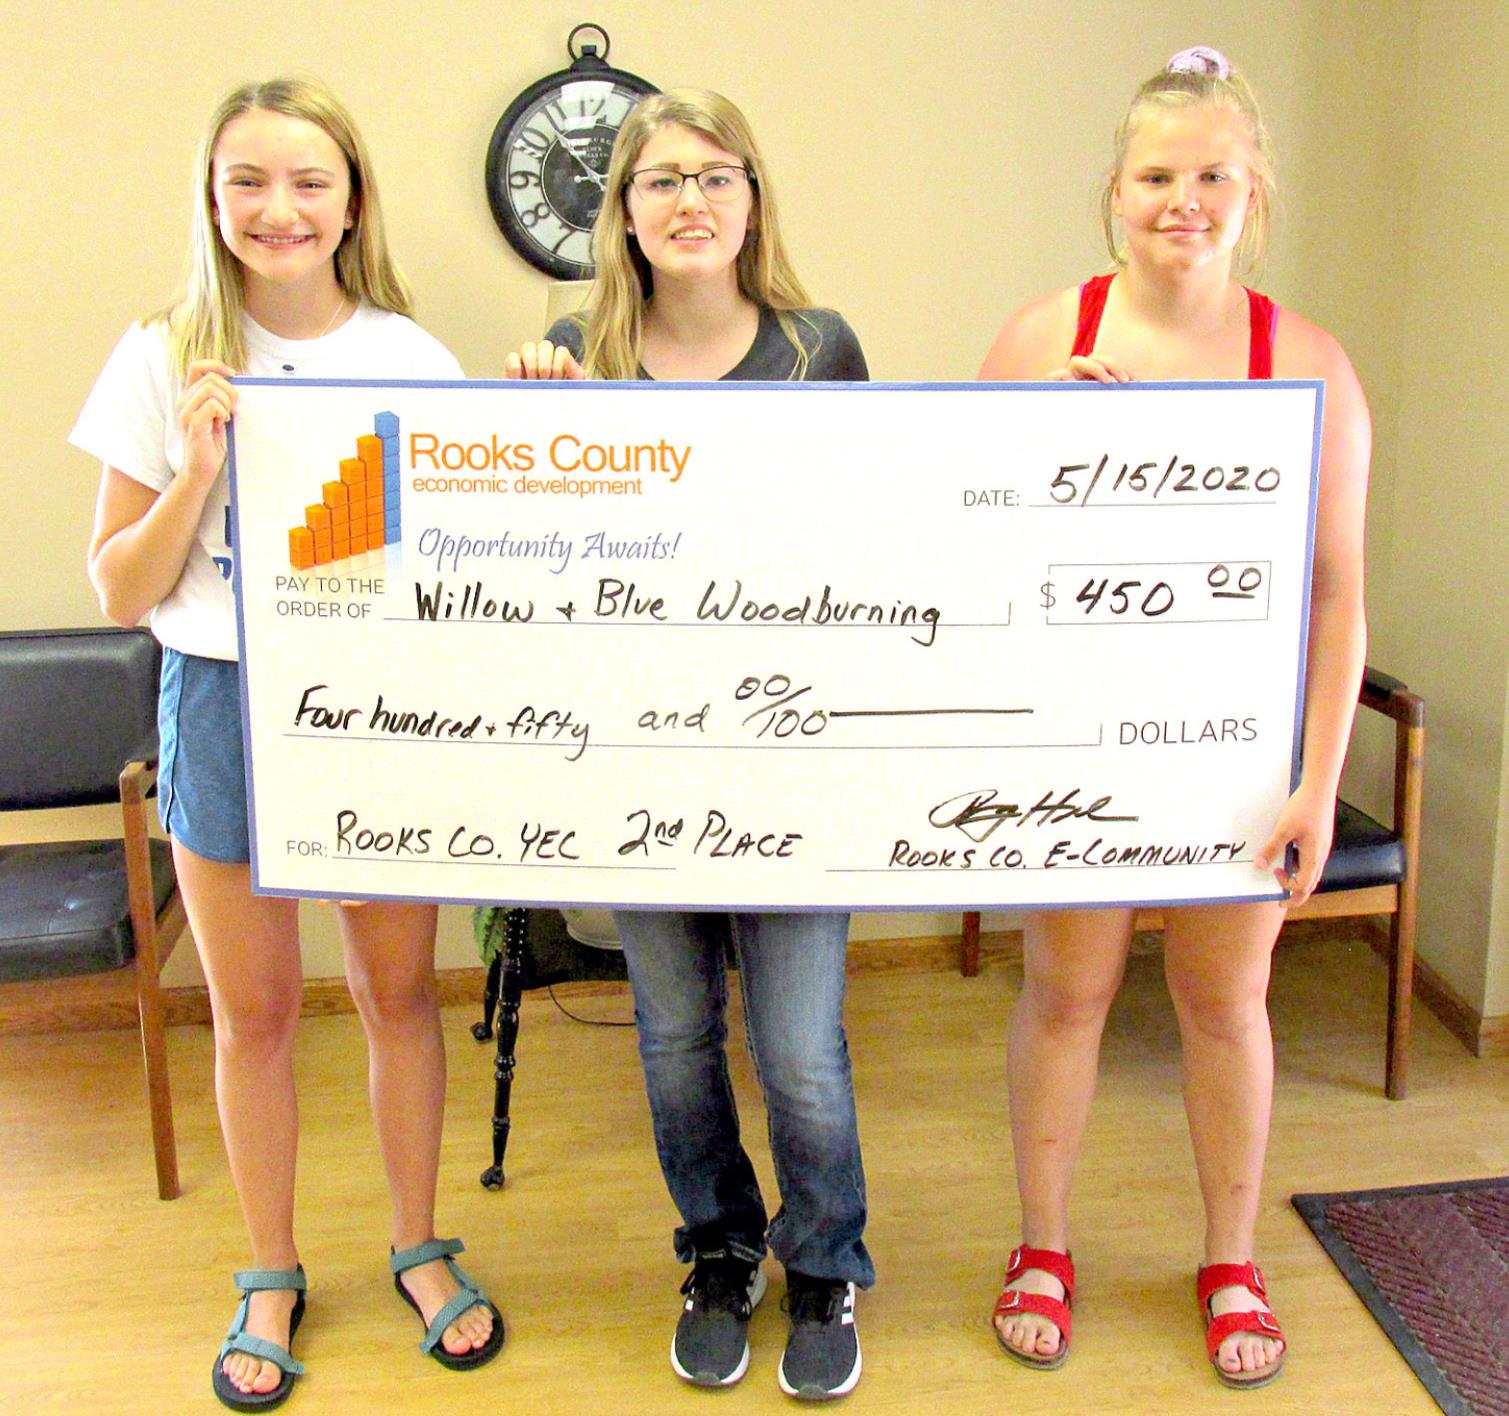 PLAINVILLE JUNIOR HIGH STUDENTS, Kaydence Grebowiec, Kaytlynn Butler and Addybelle Birdsall won second place and $450 prize money for their concept called, Willow &amp; Blue Woodworking. They created wood art pieces and signs using wood burning tools.